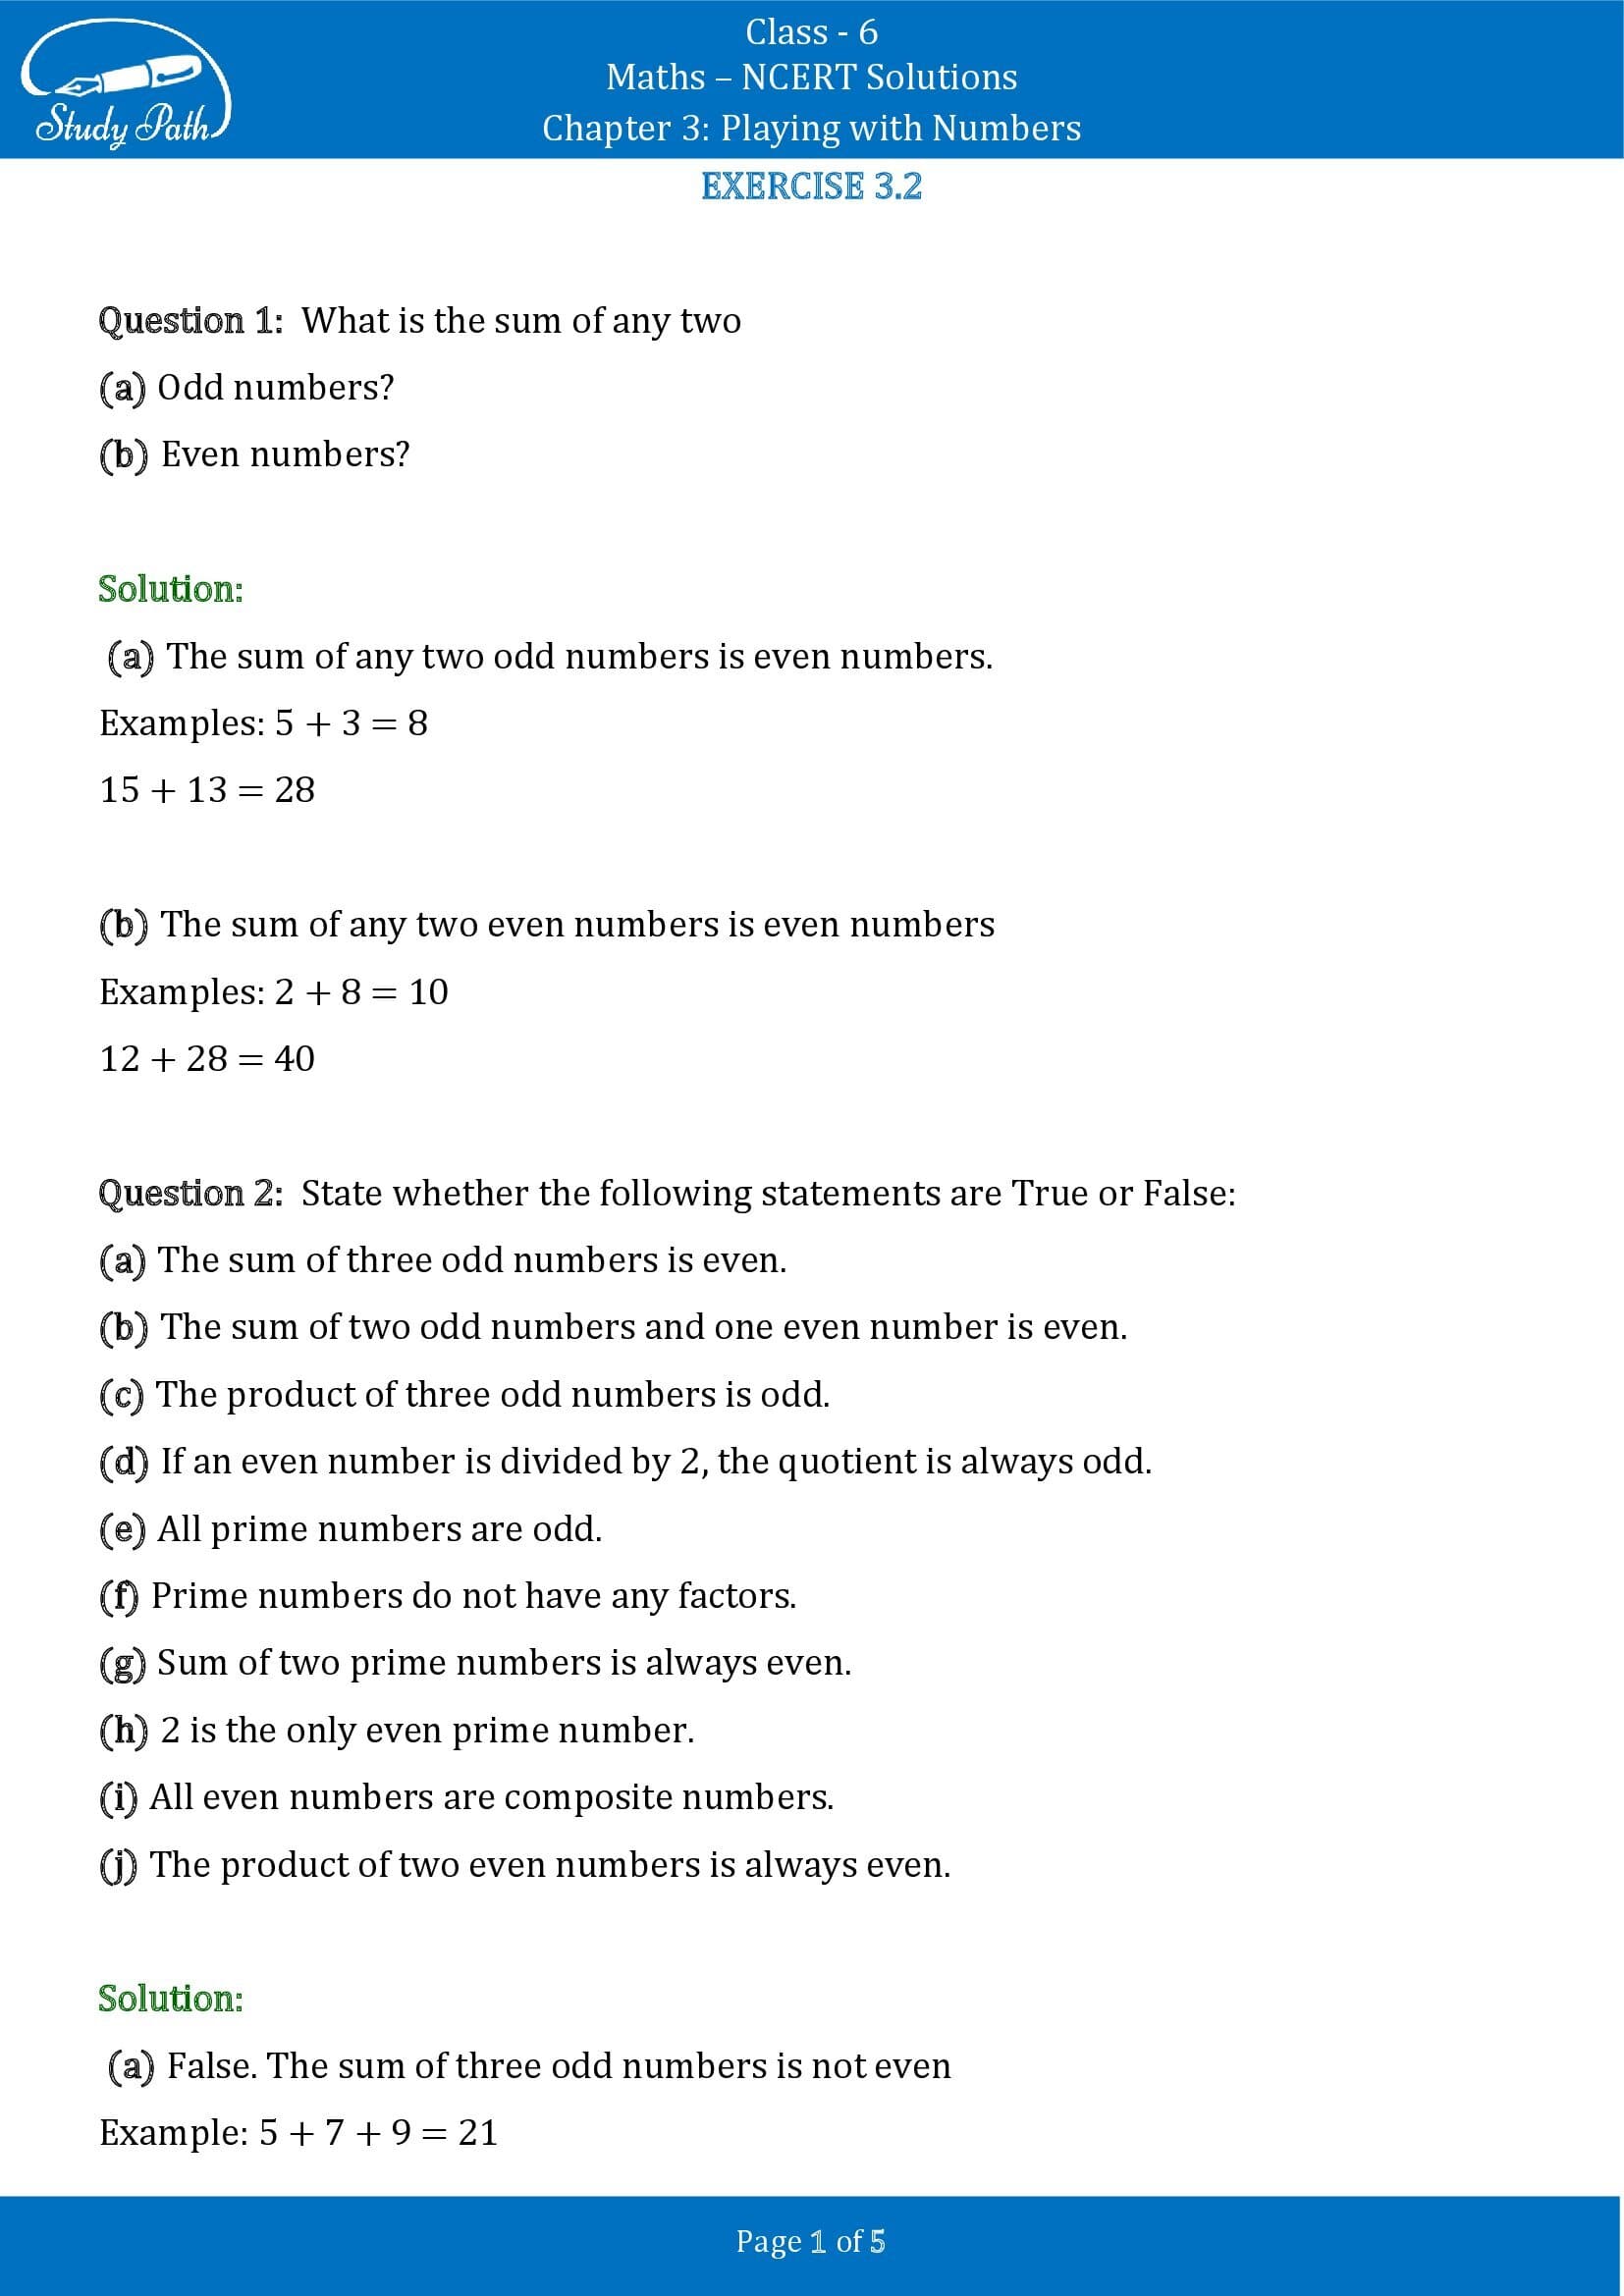 NCERT Solutions for Class 6 Maths Chapter 3 Playing with Numbers Exercise 3.2 00001